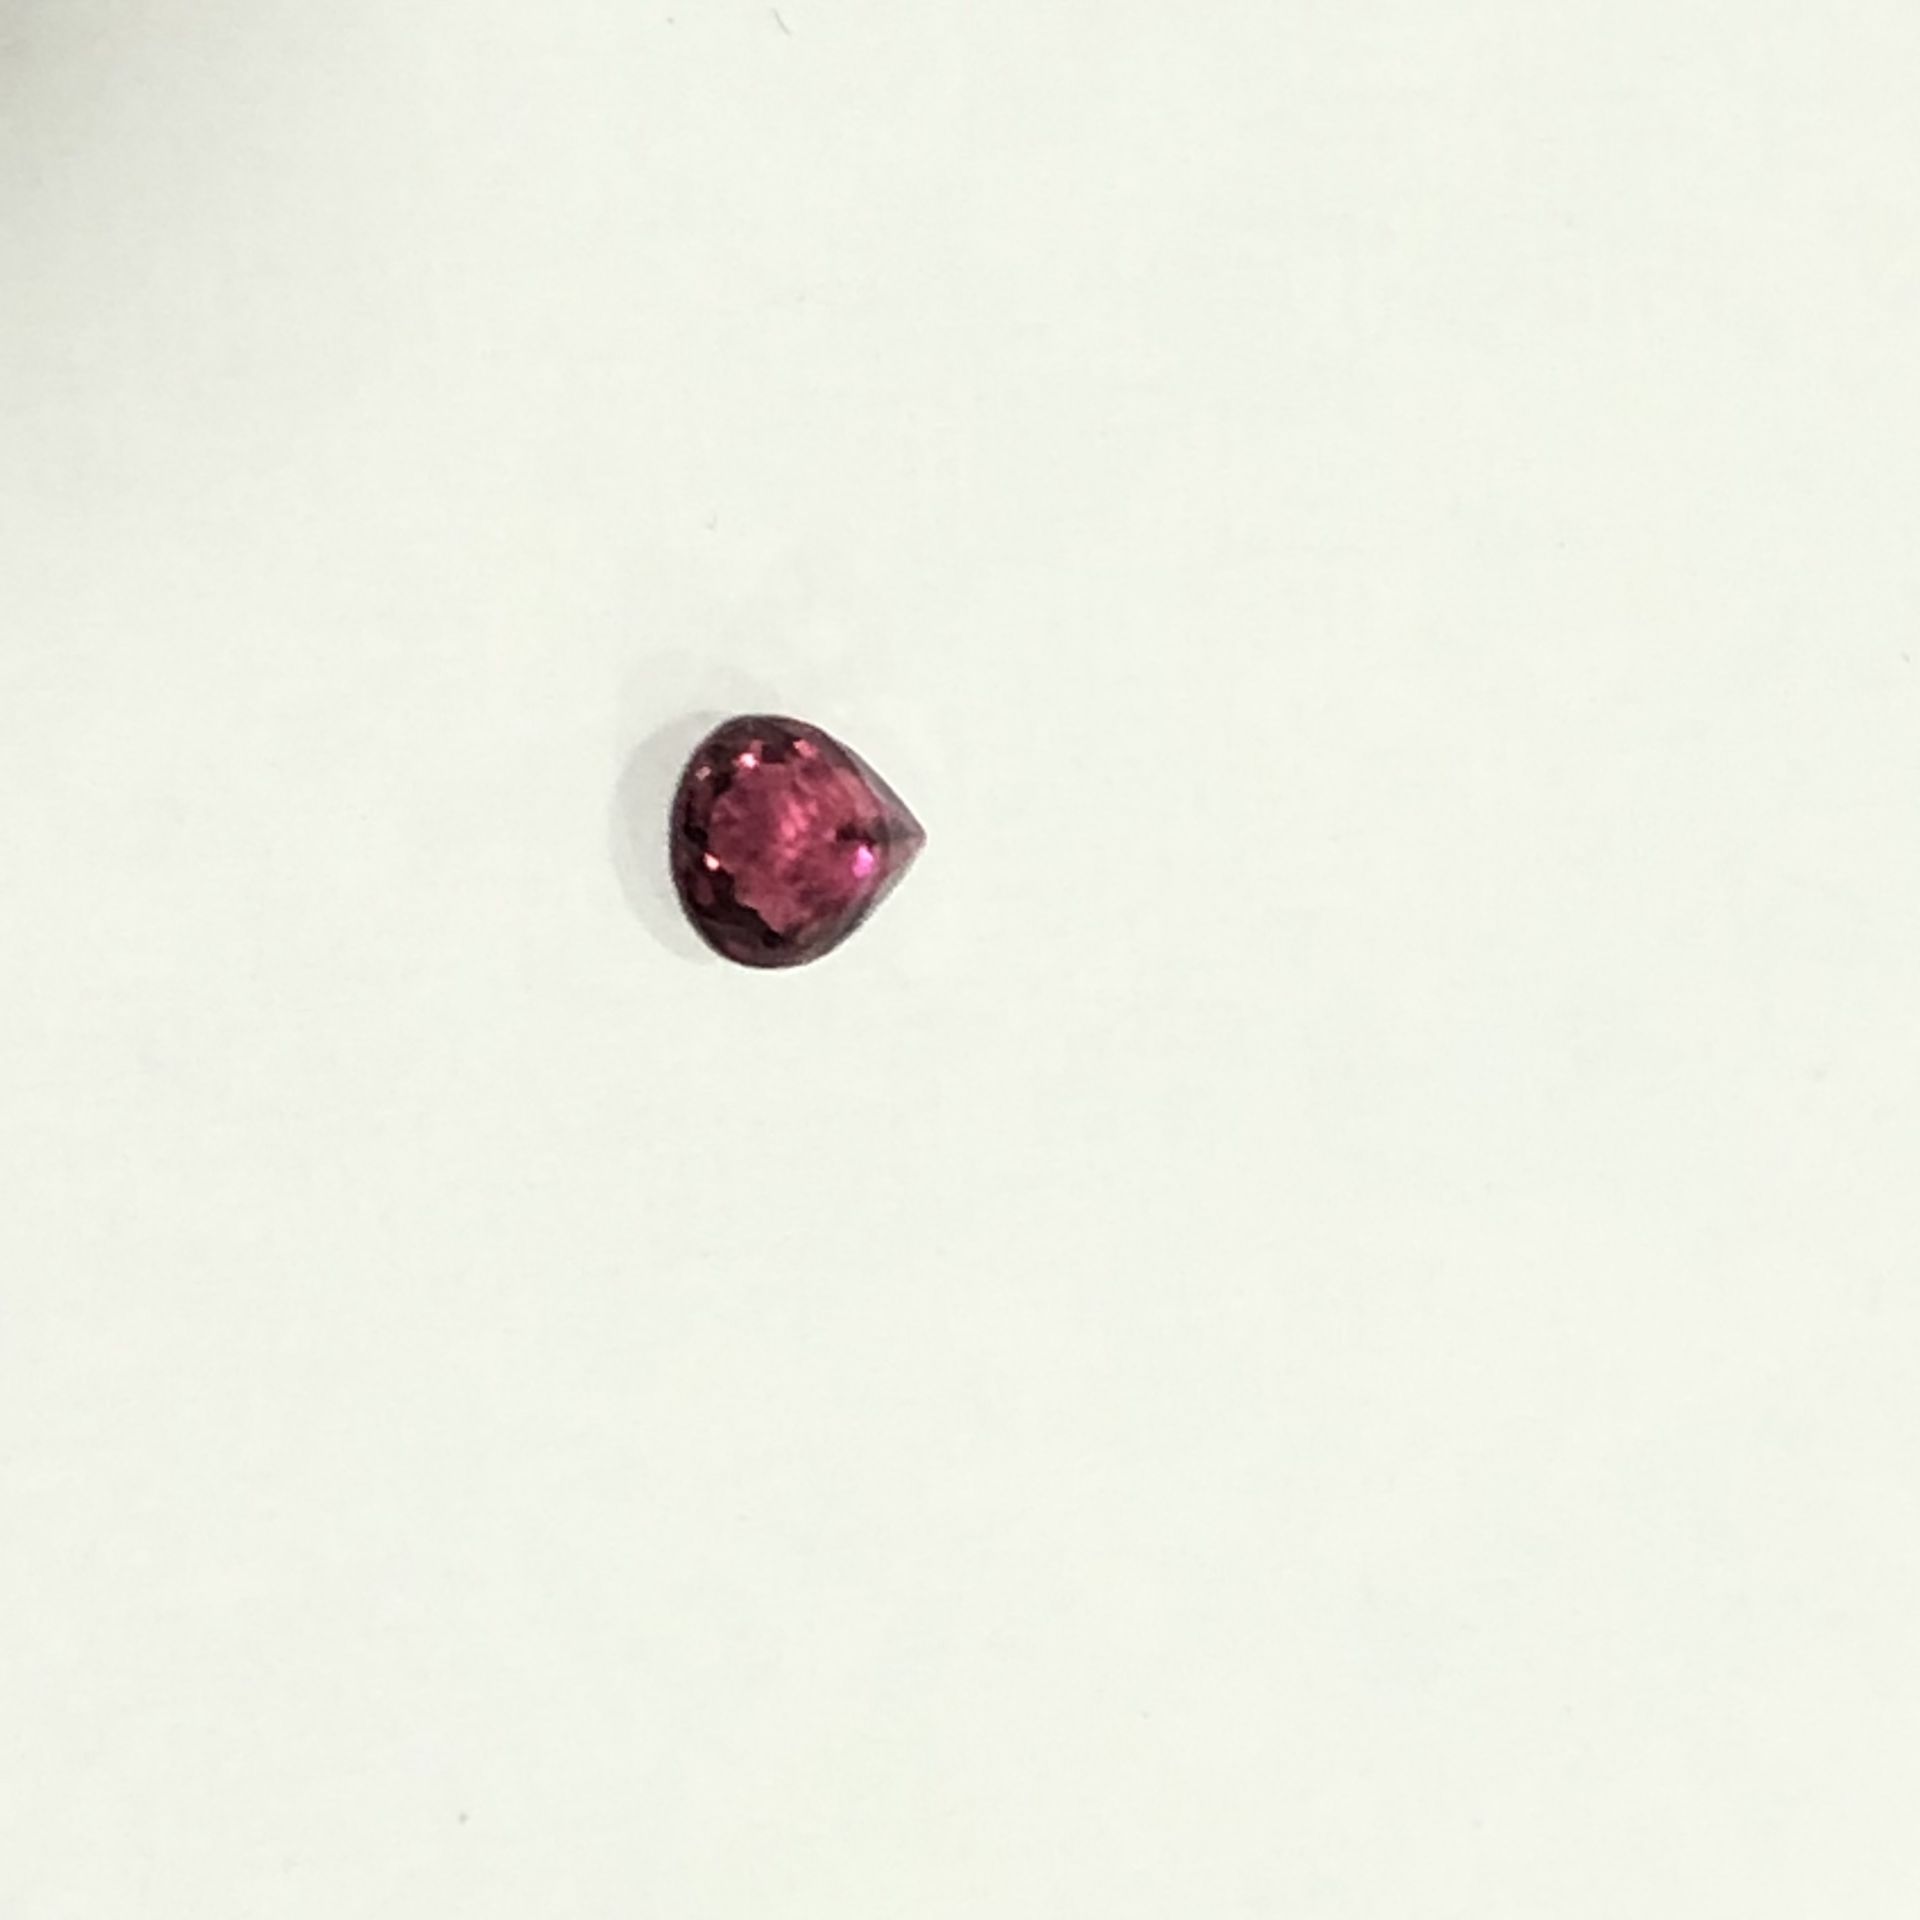 0.79ct Natural Rubellite with IGI Certificate - Image 8 of 8